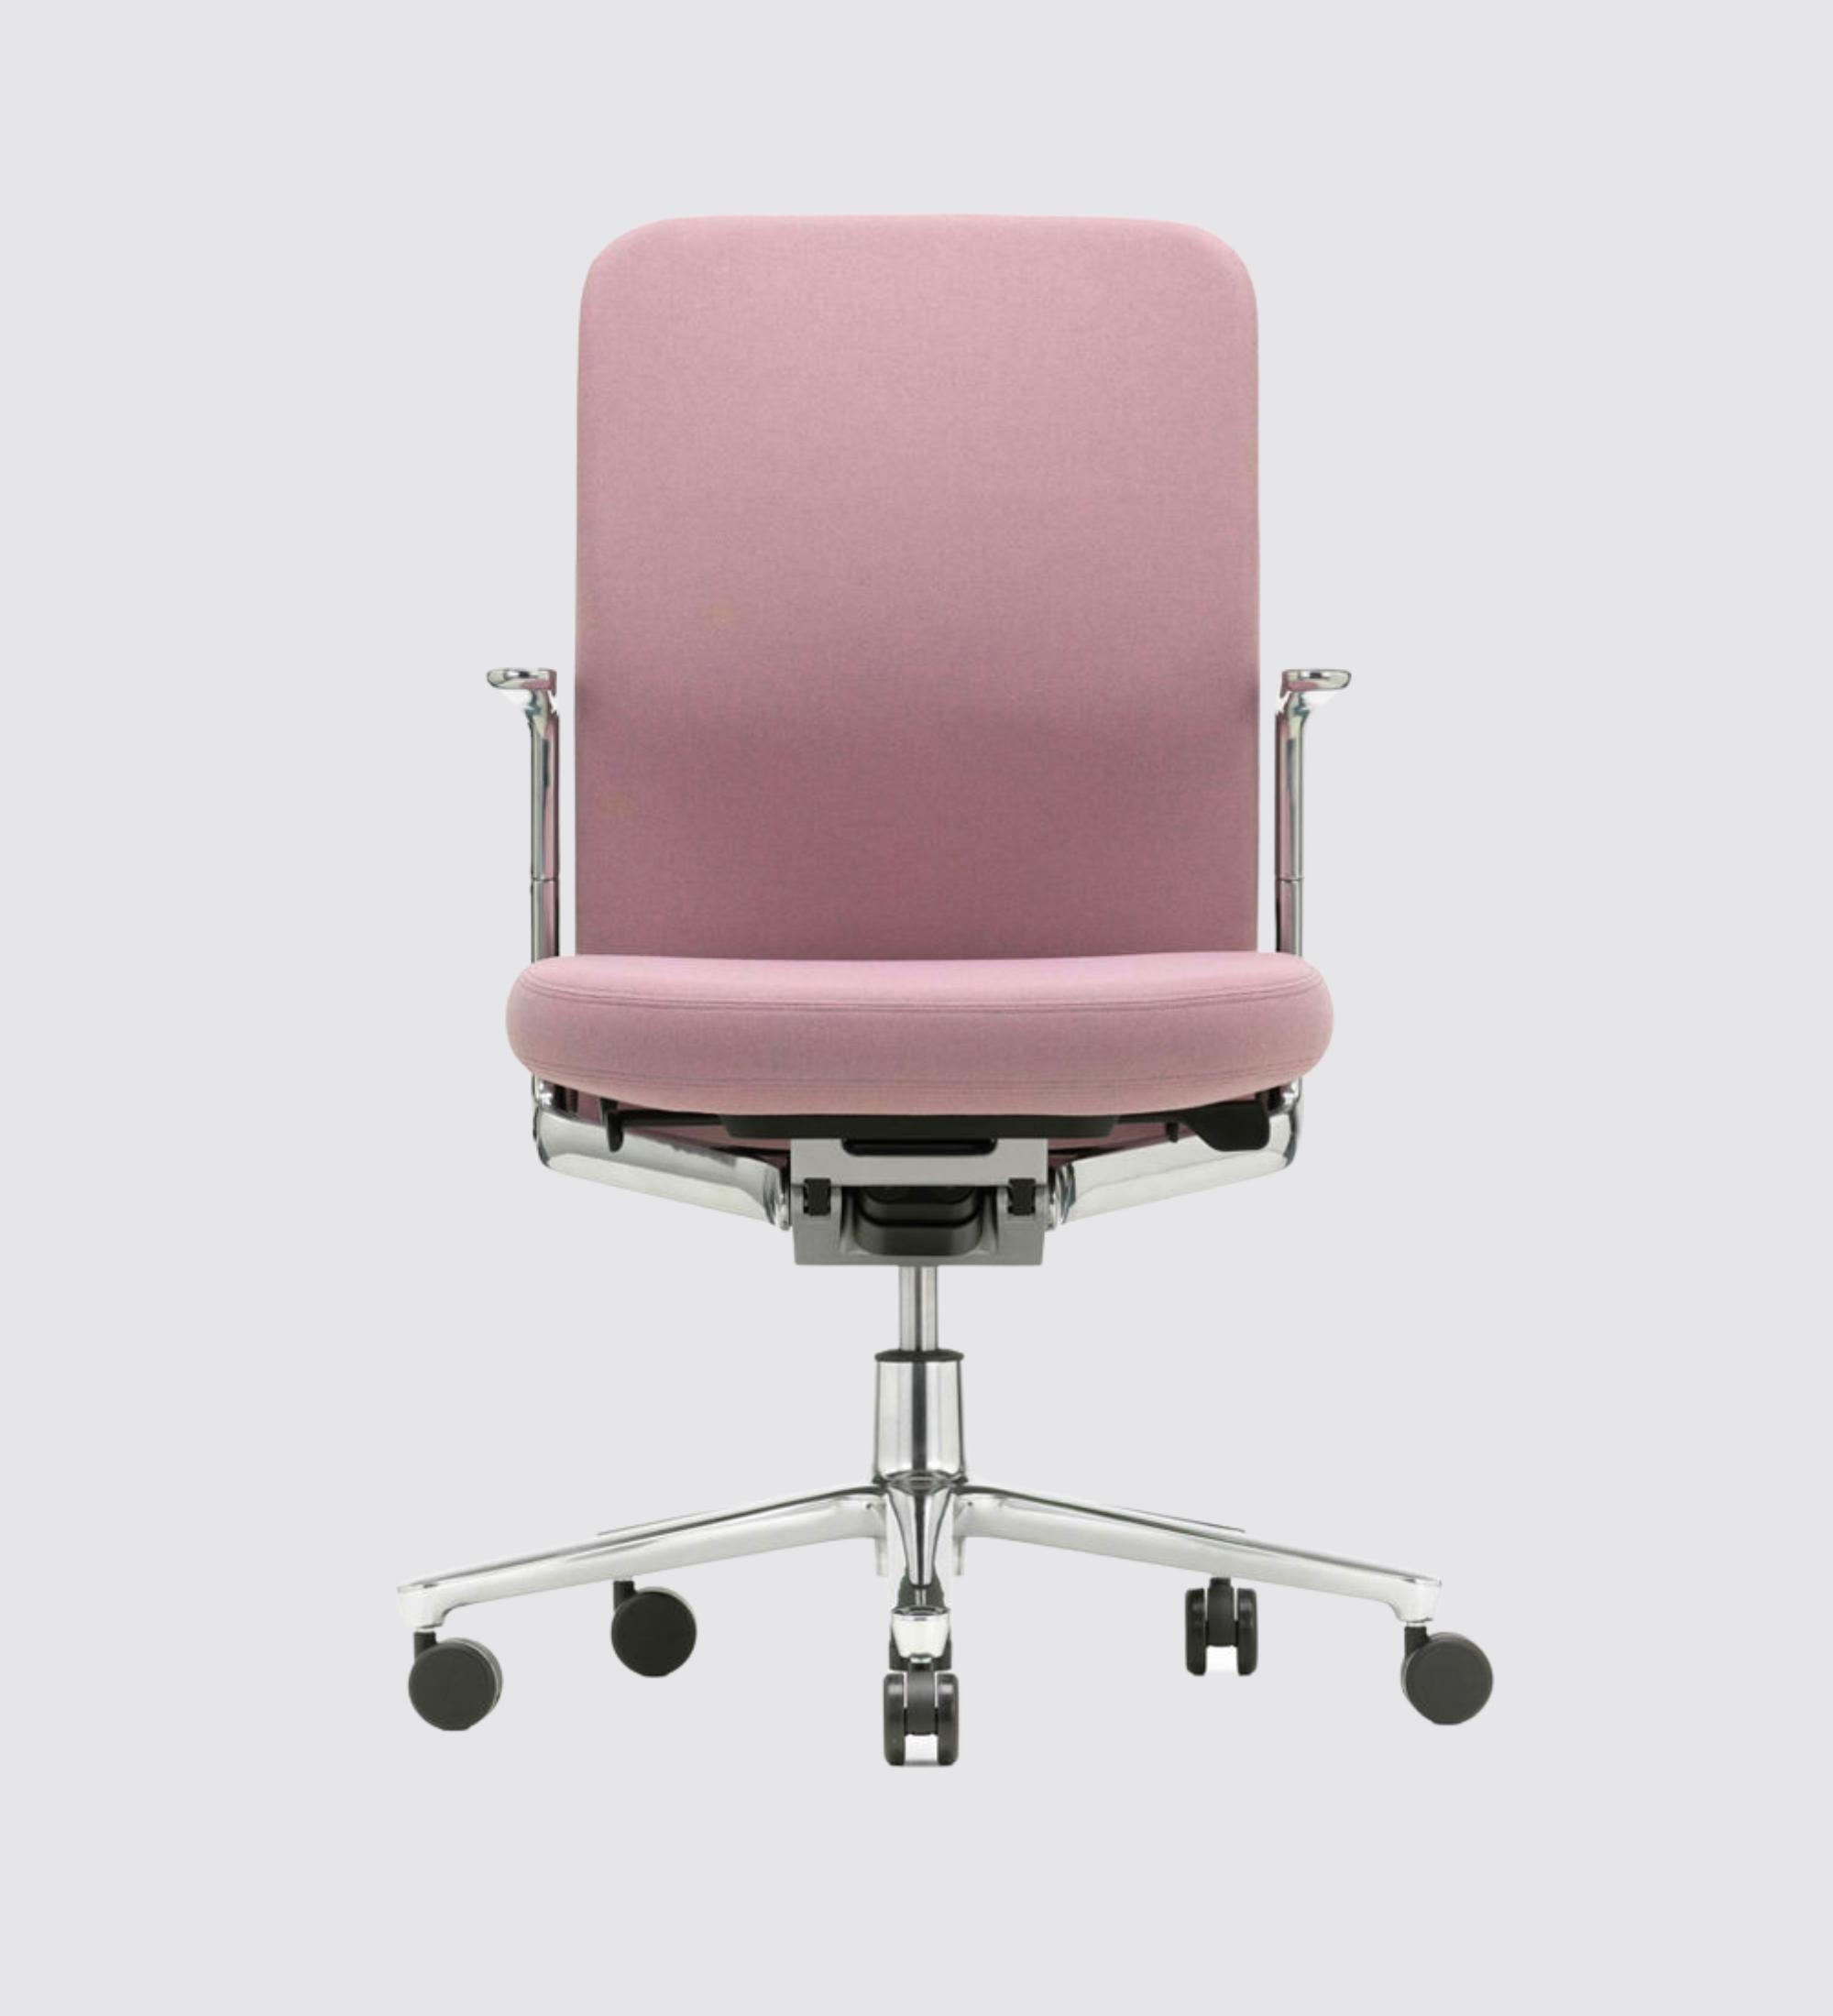 Vitra Pacific Chair Plano Pink